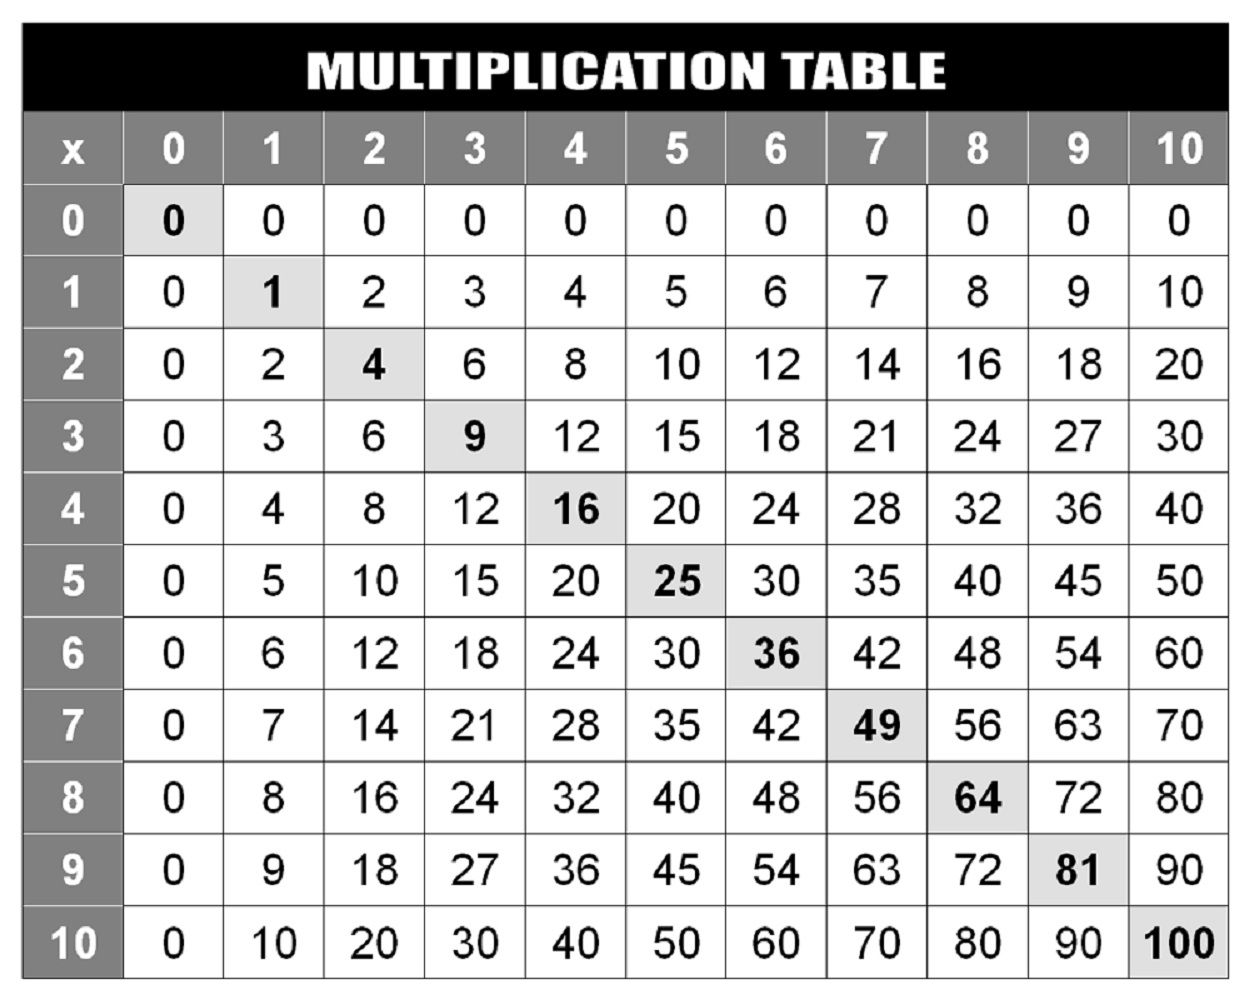 multiplication table up to 100